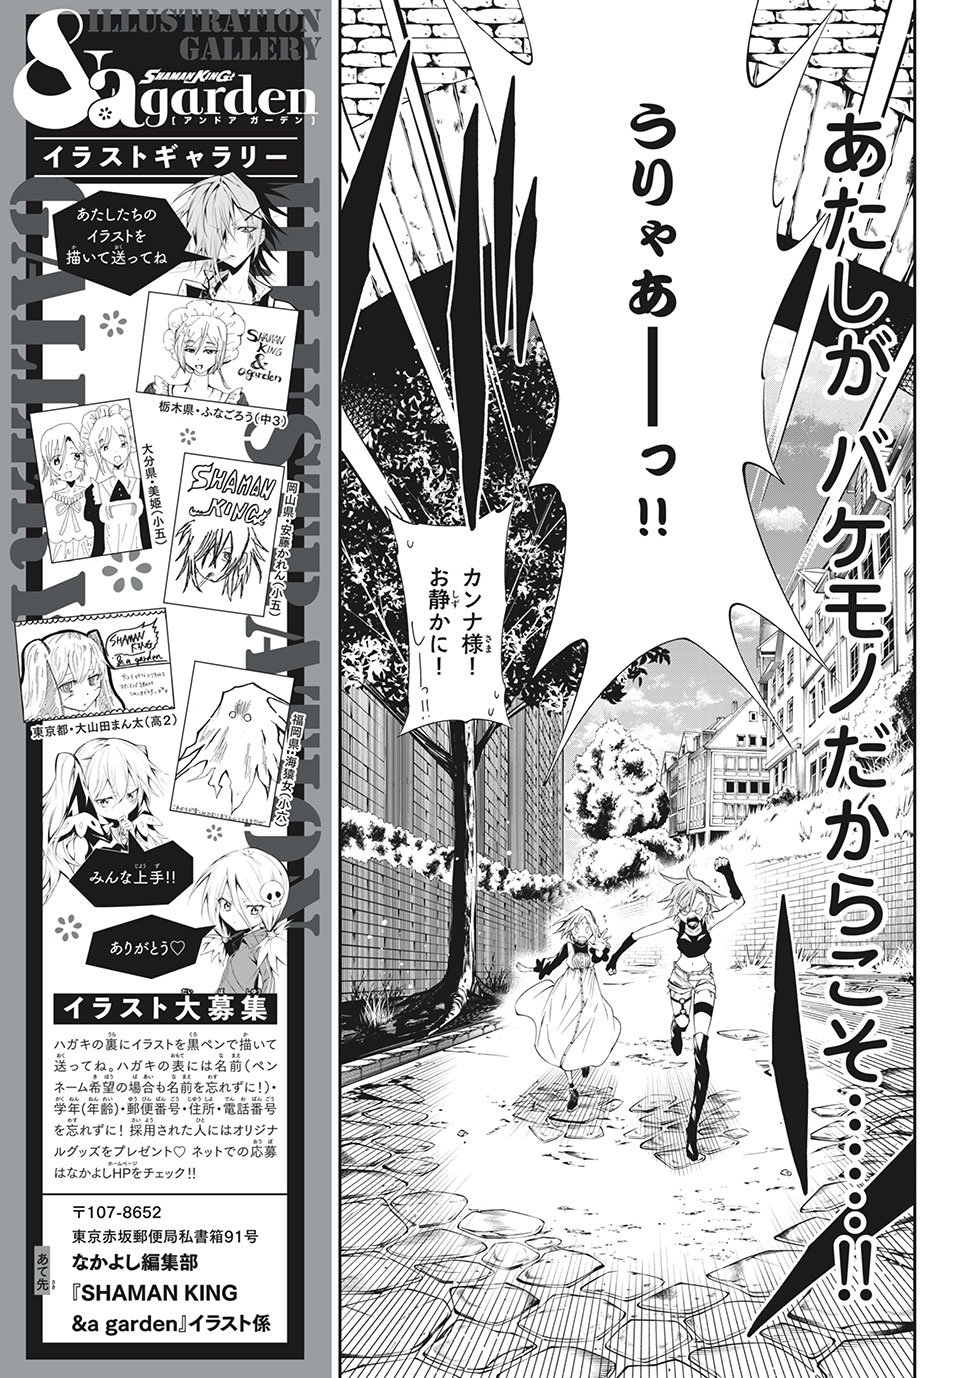 Shaman King: and a garden 第2.1話 - Page 5